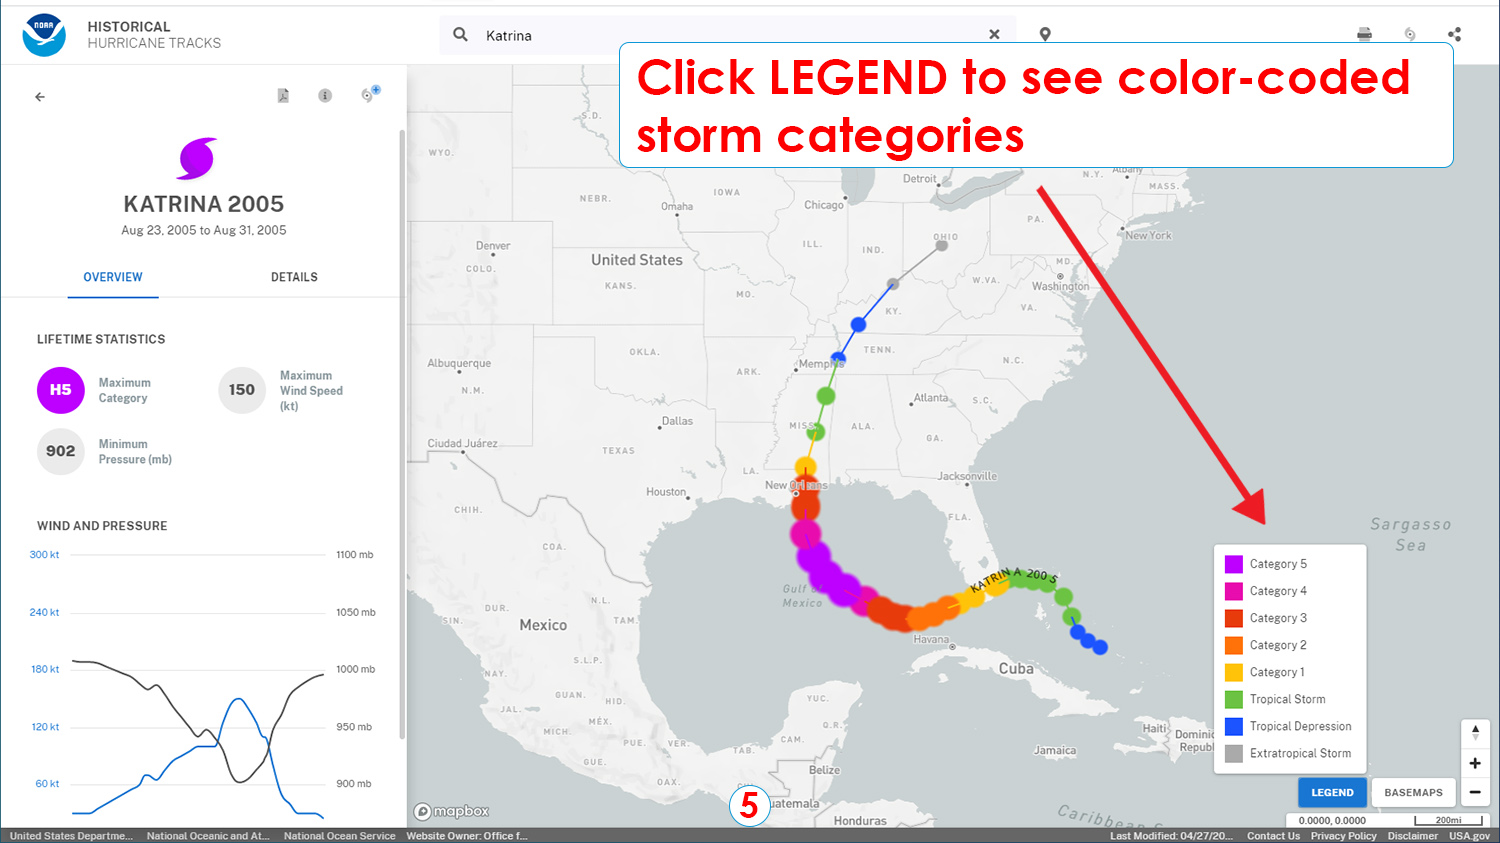 Step 5: Click LEGEND to see color-coded storm categories.